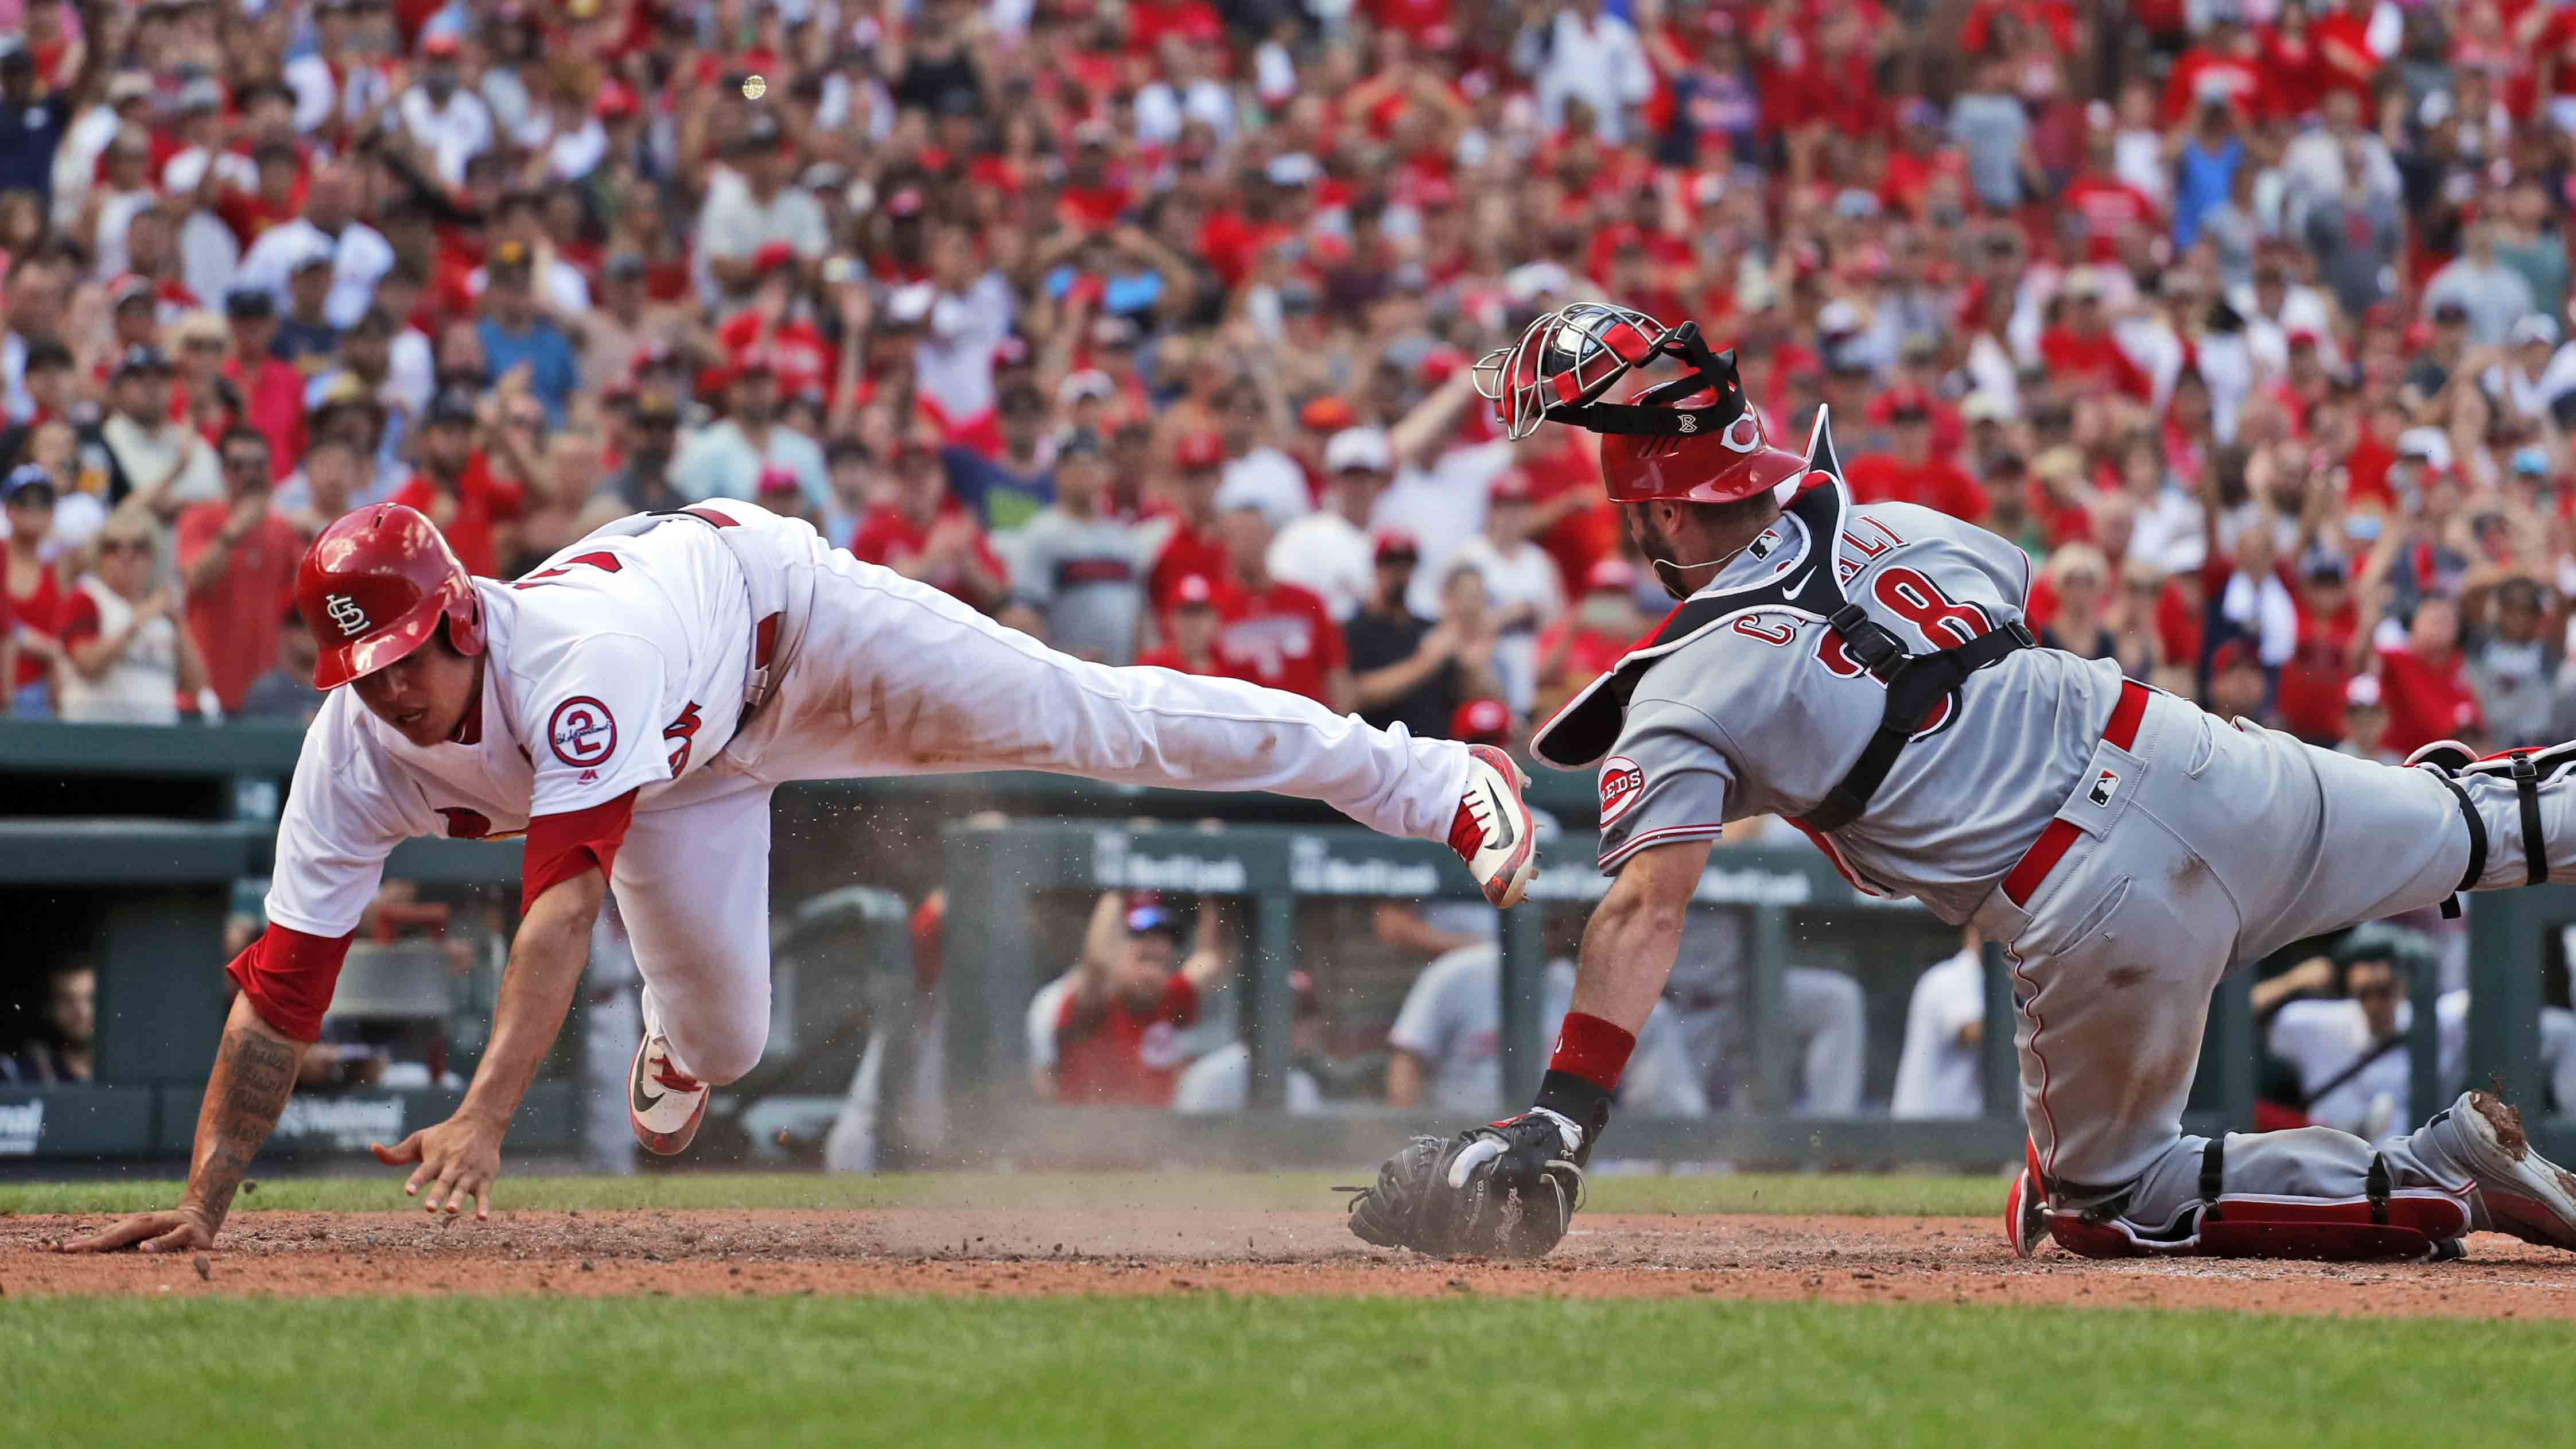 Cards spoil chance to keep series win streak going with 6-4 loss to Reds